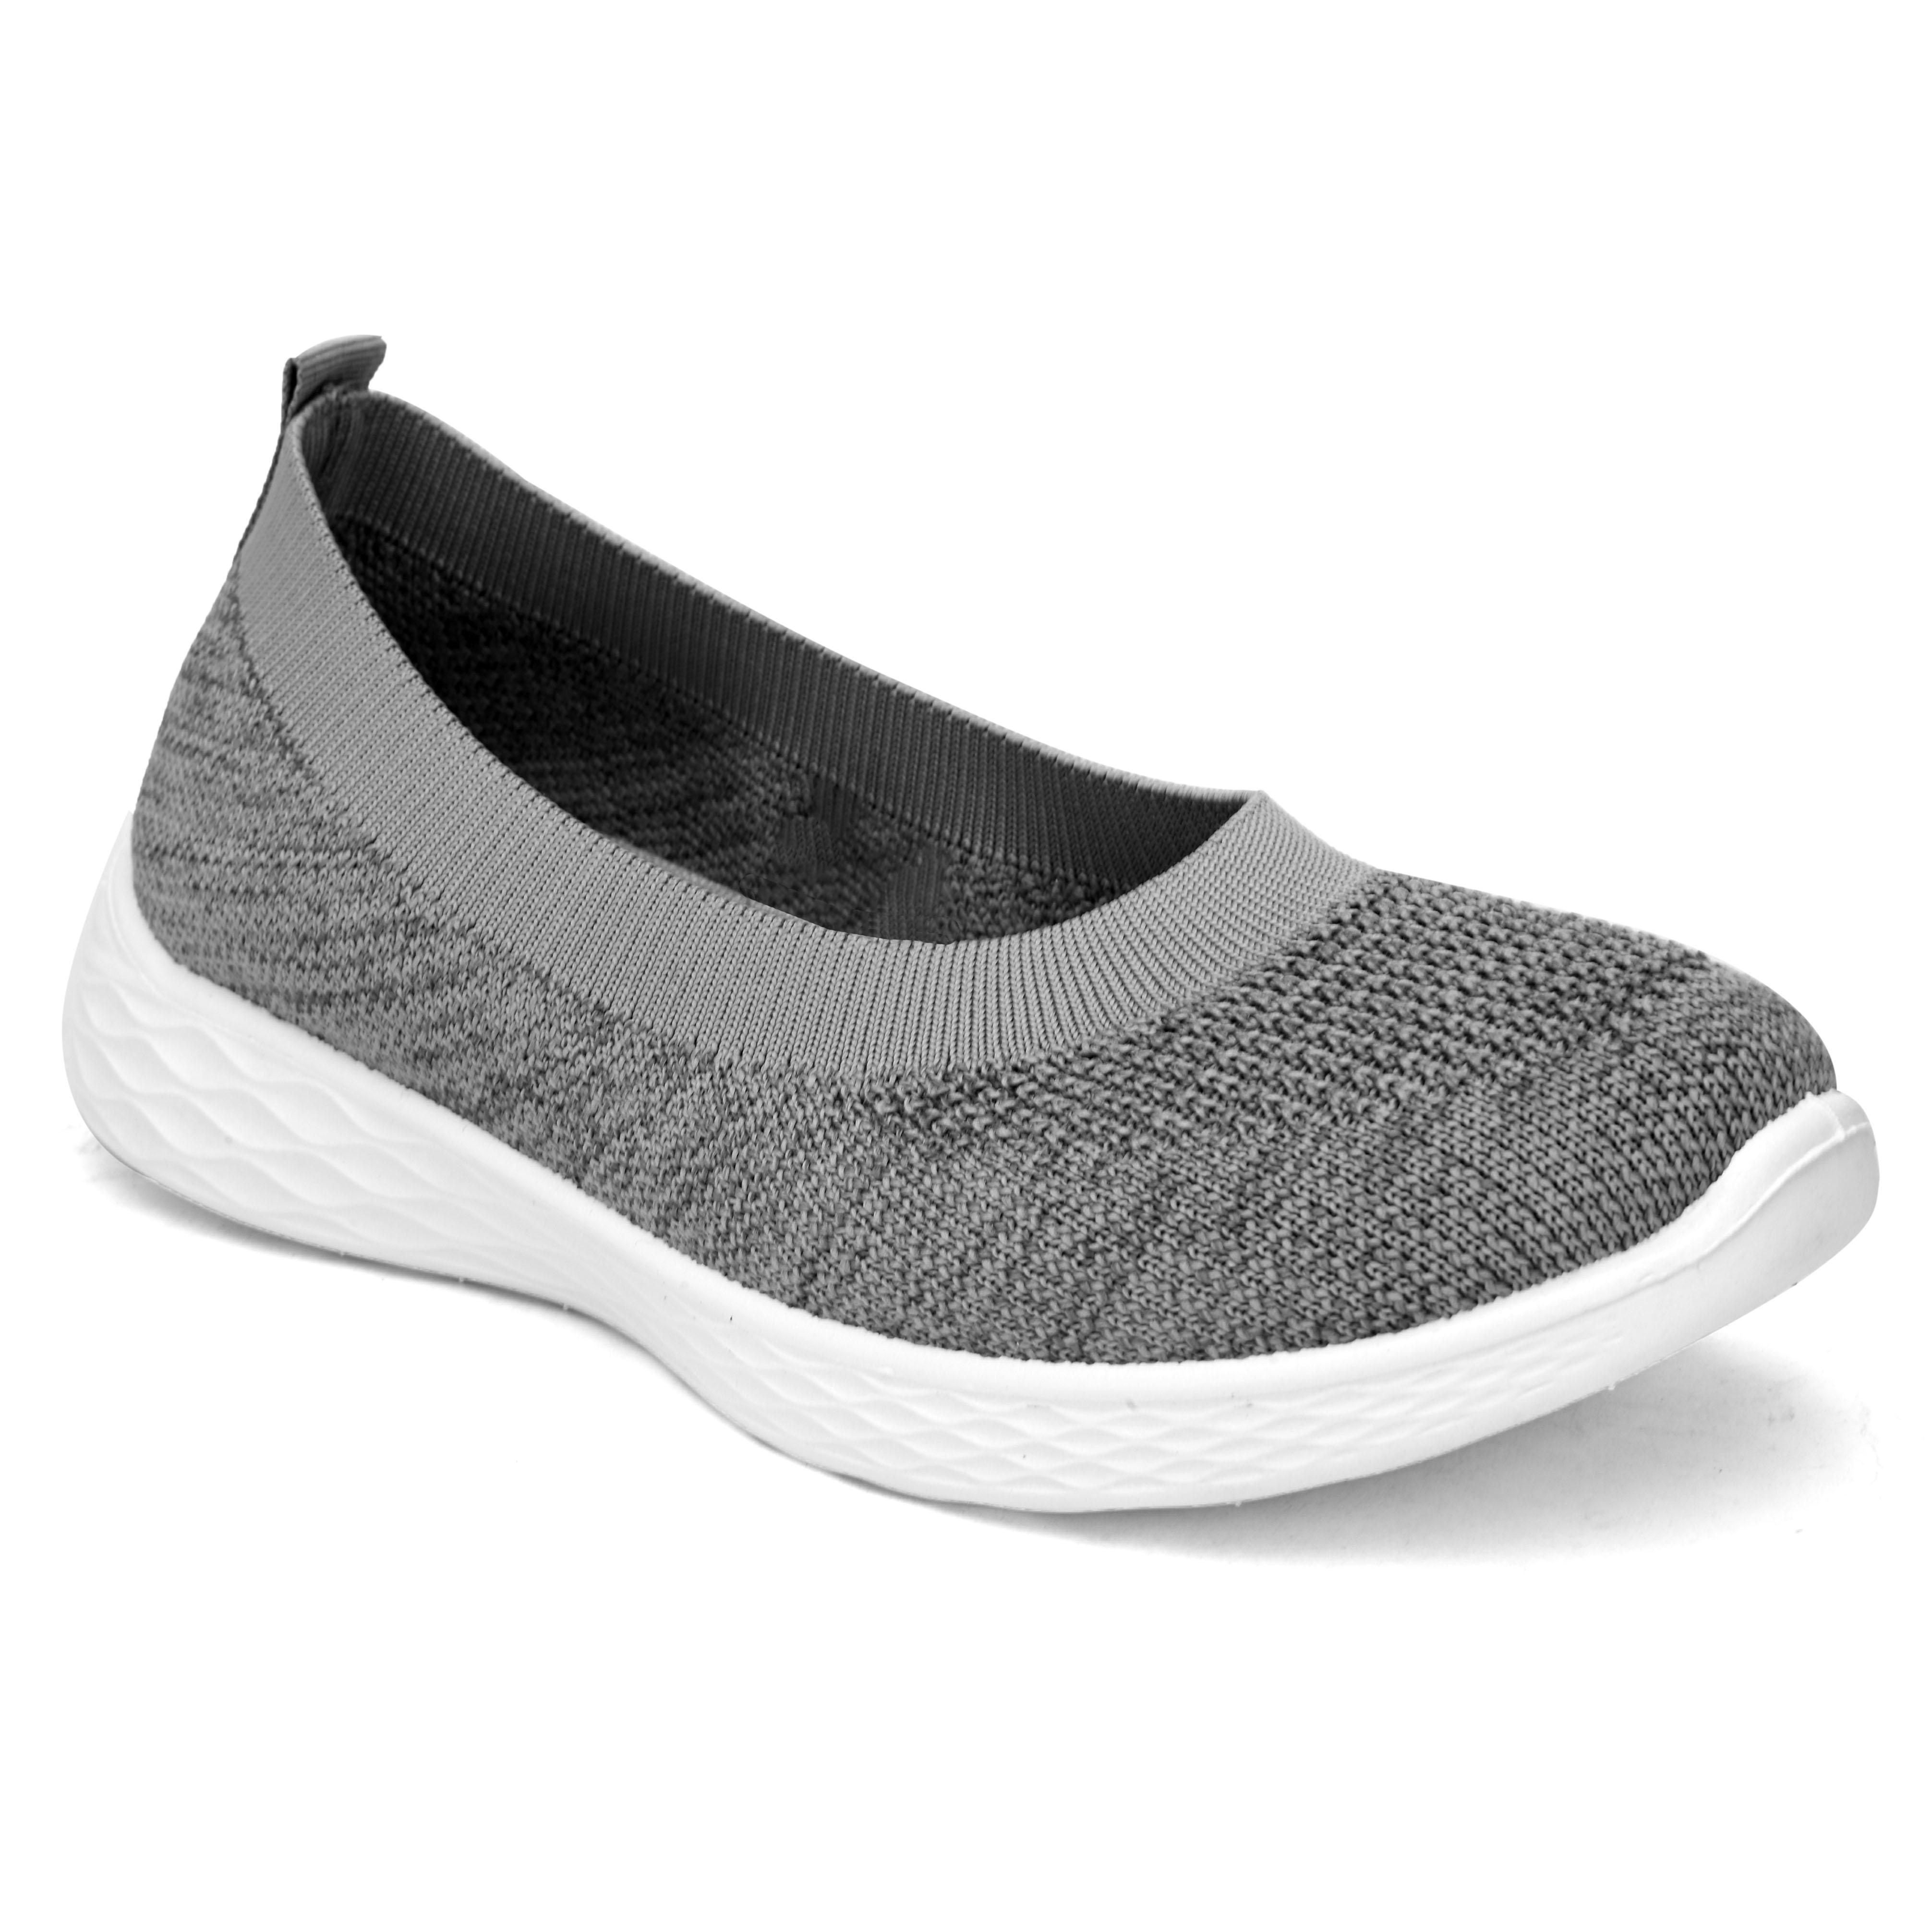 Briskers Casual Bellies for Women (Grey)